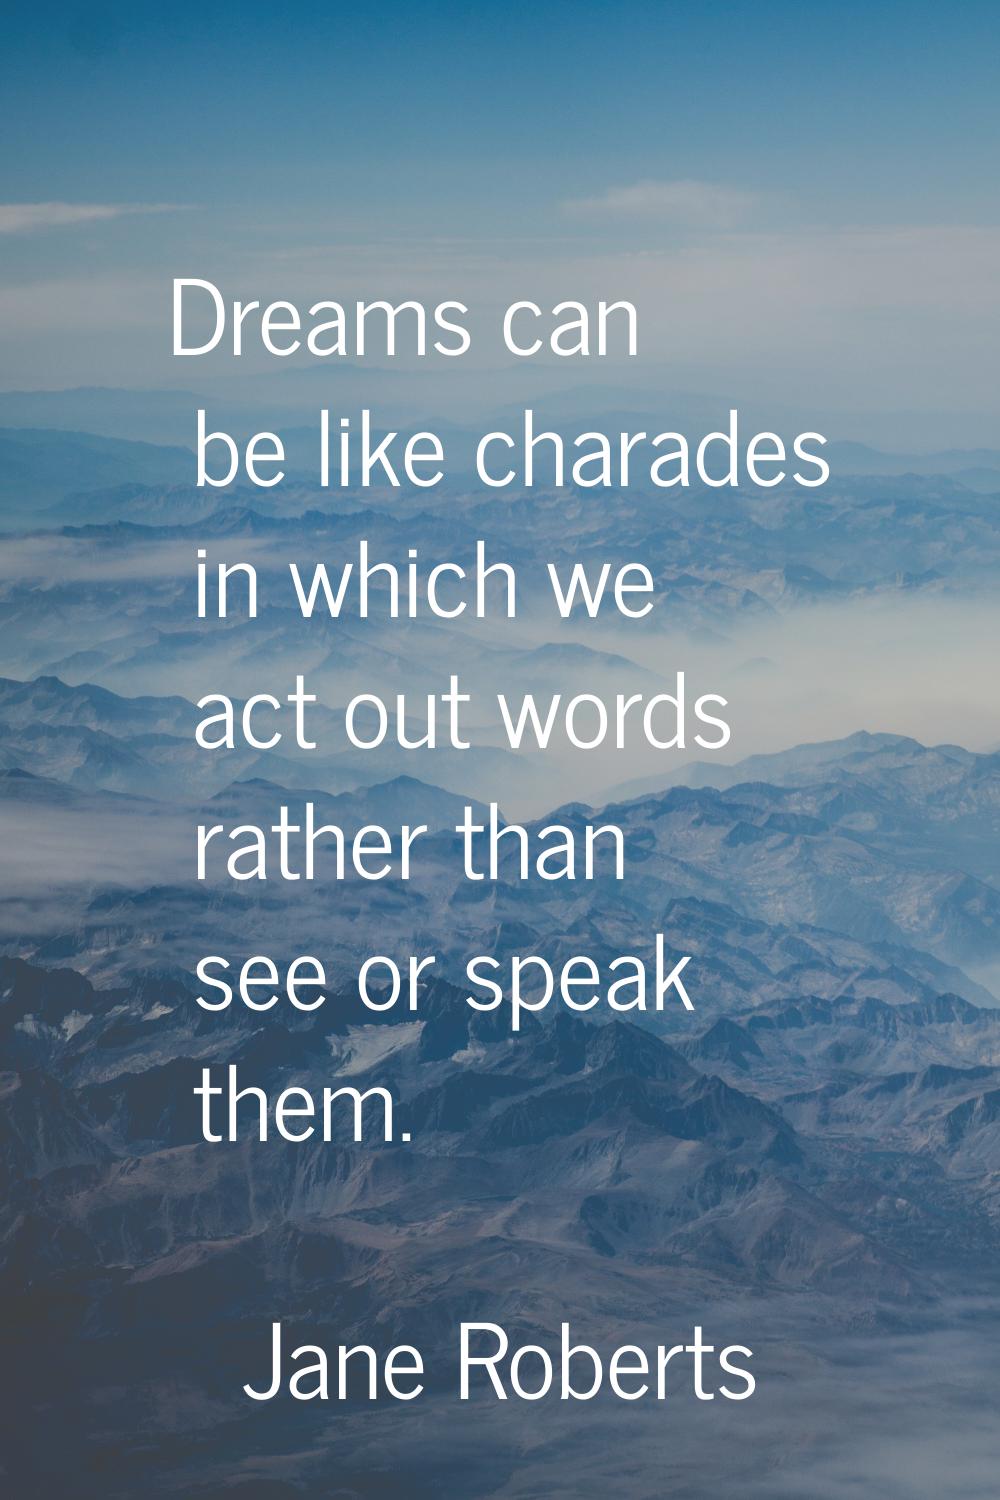 Dreams can be like charades in which we act out words rather than see or speak them.